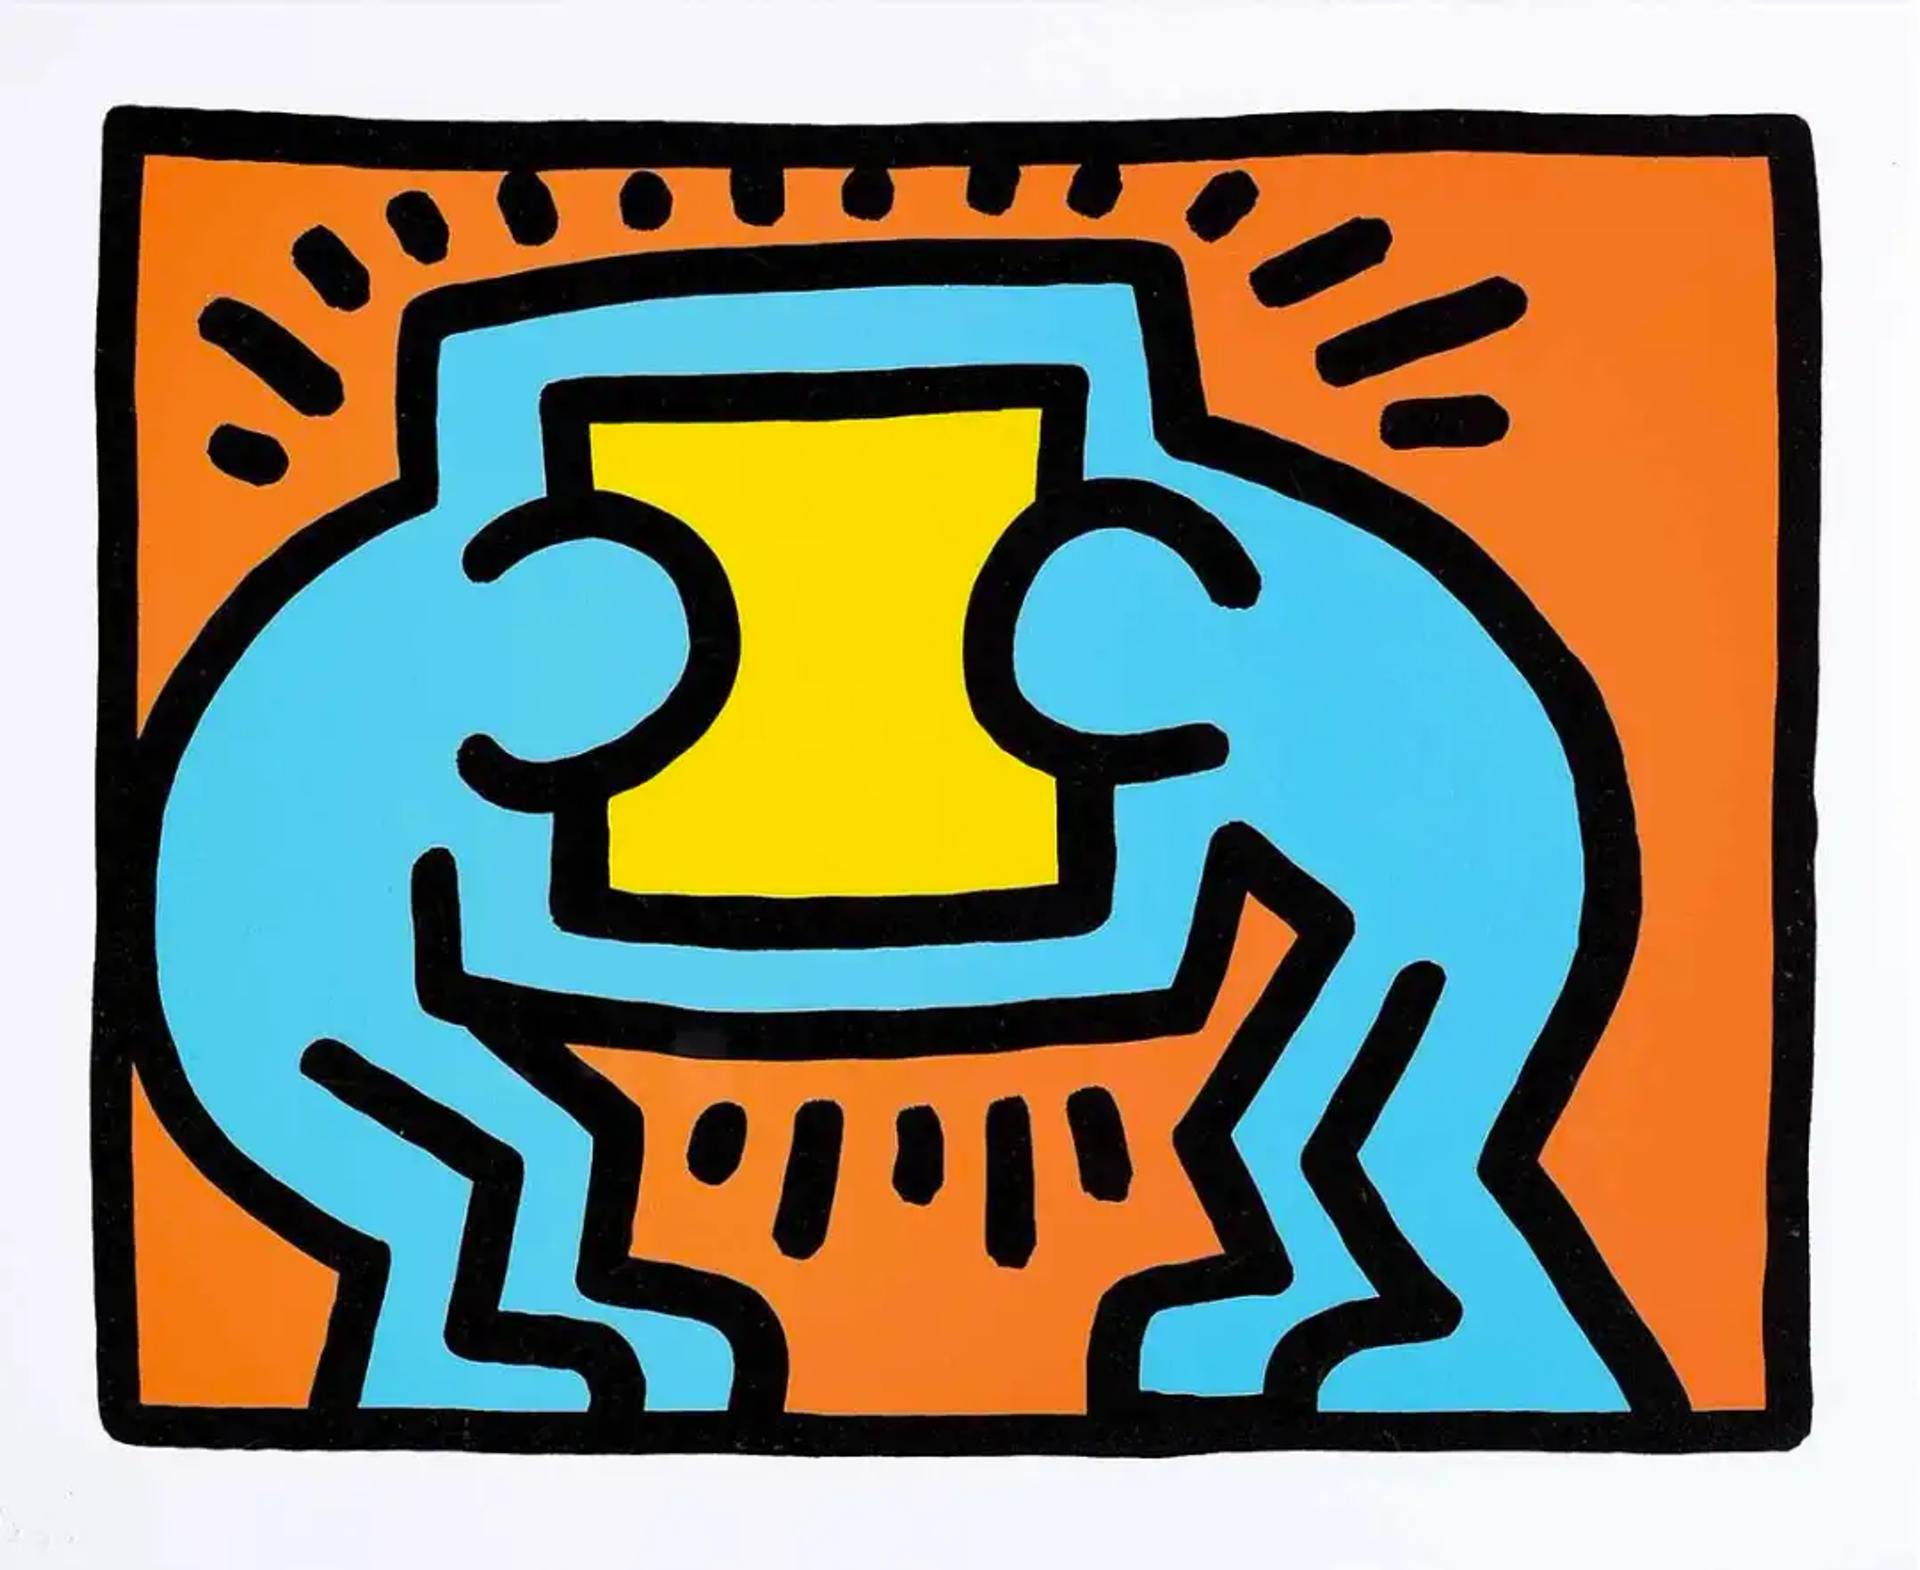 An image of a print by Keith Haring, made entirely of primary colours contained within thick black lines, Pop Shop VI is typical of Haring’s oeuvre. Featuring conjoined figures emanating lines of energy in a display of solidarity and community.